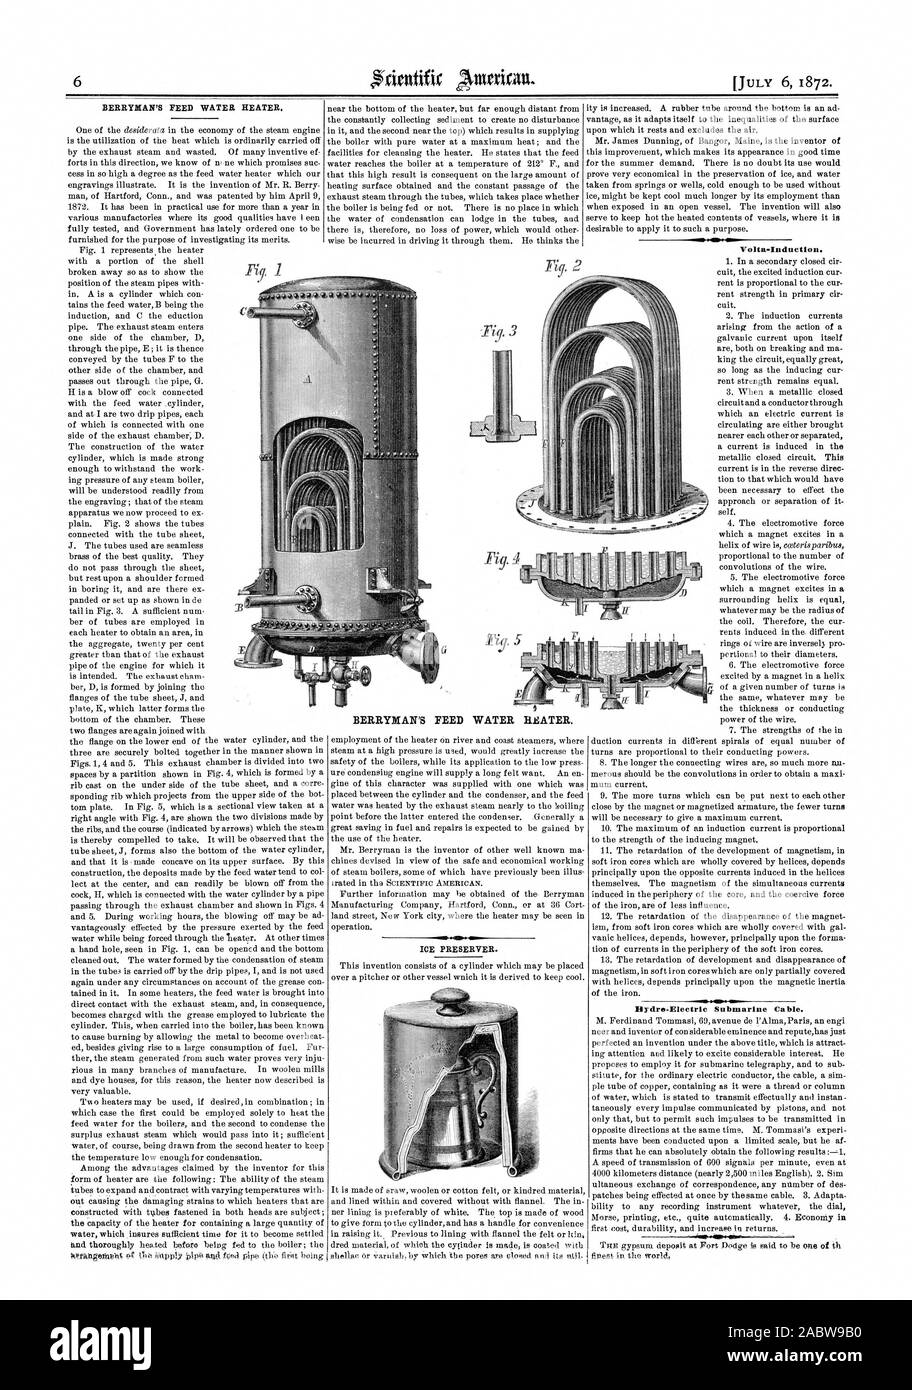 BERRYMAN'S FEED WATER HEATER. ICE PRESERVER. Volta-Induction. Hydre-Electric Submarine Cable., scientific american, 1872-07-06 Stock Photo